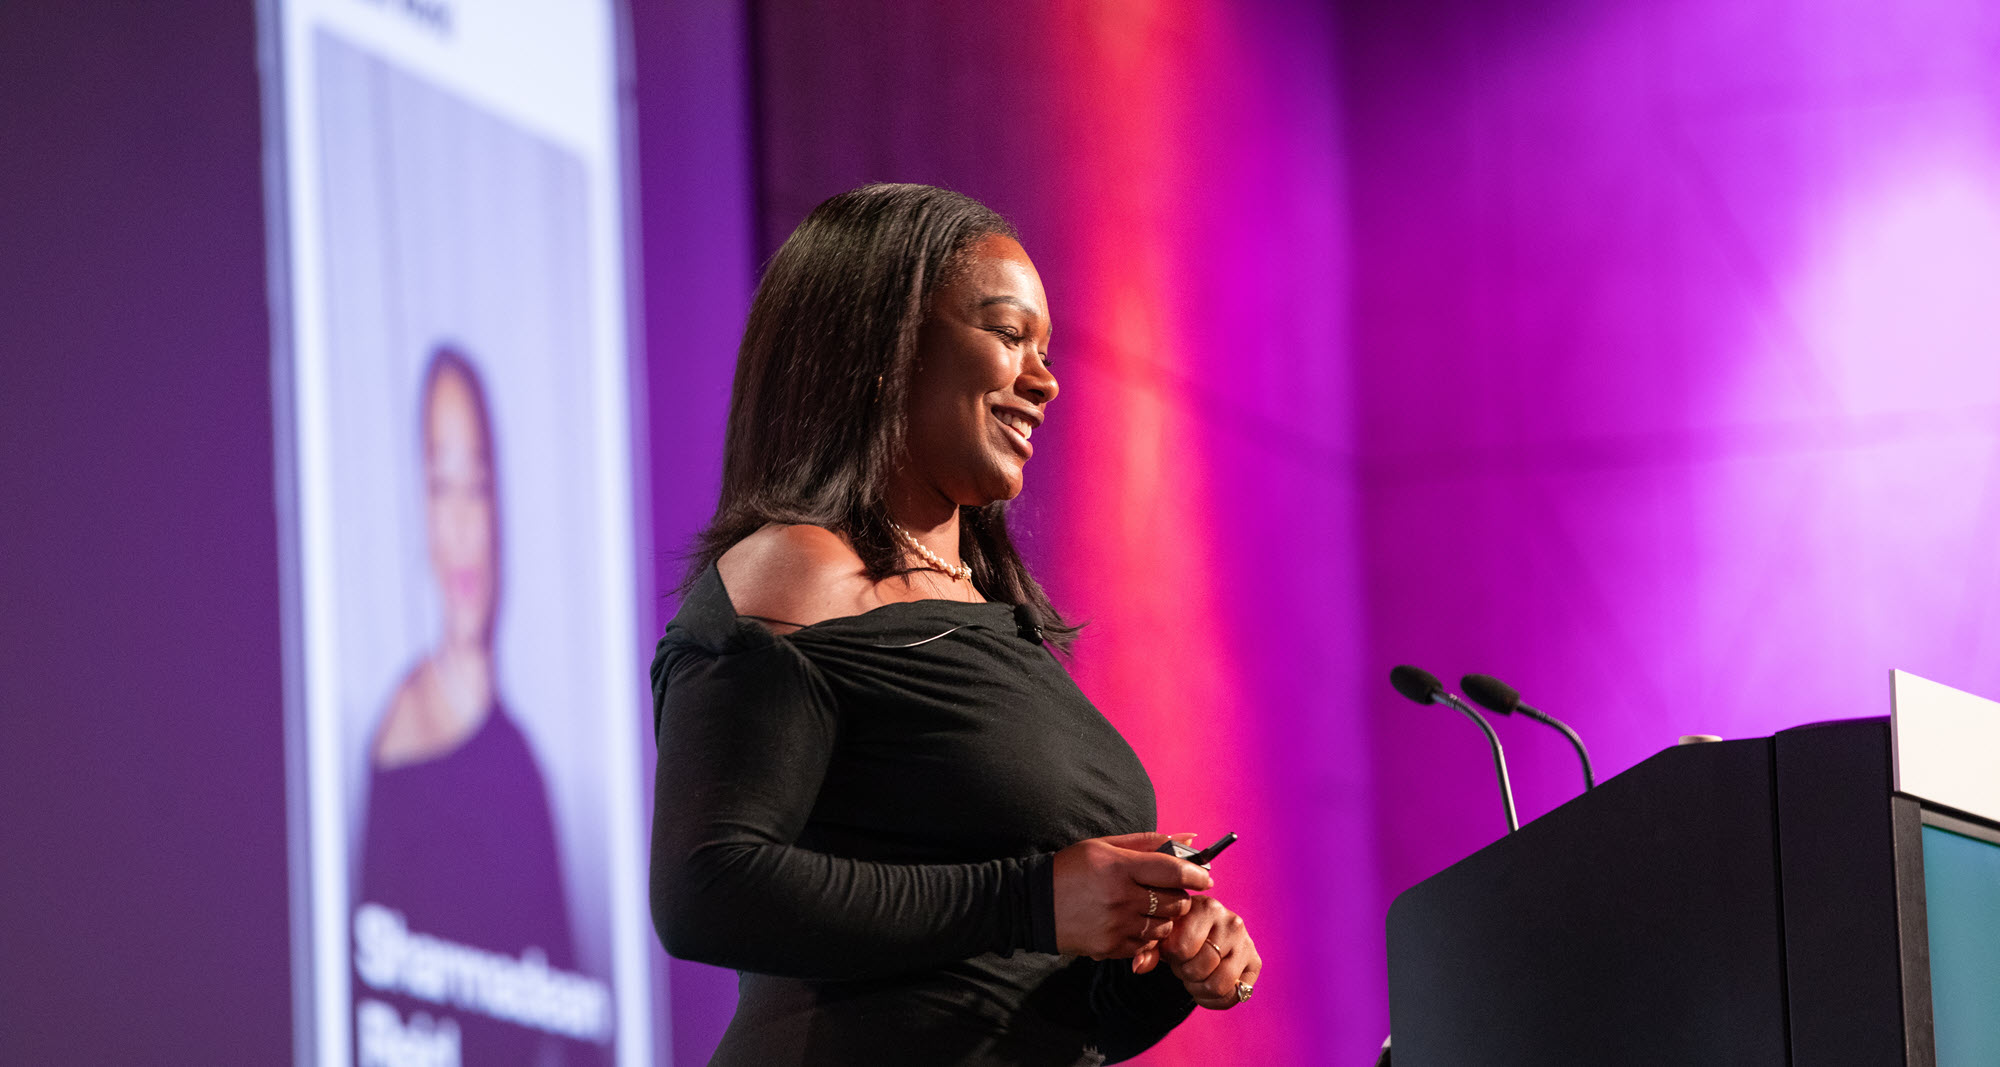 Sharmadean Reid: Know Your Salon Clients – Finding The Human Story in the Data